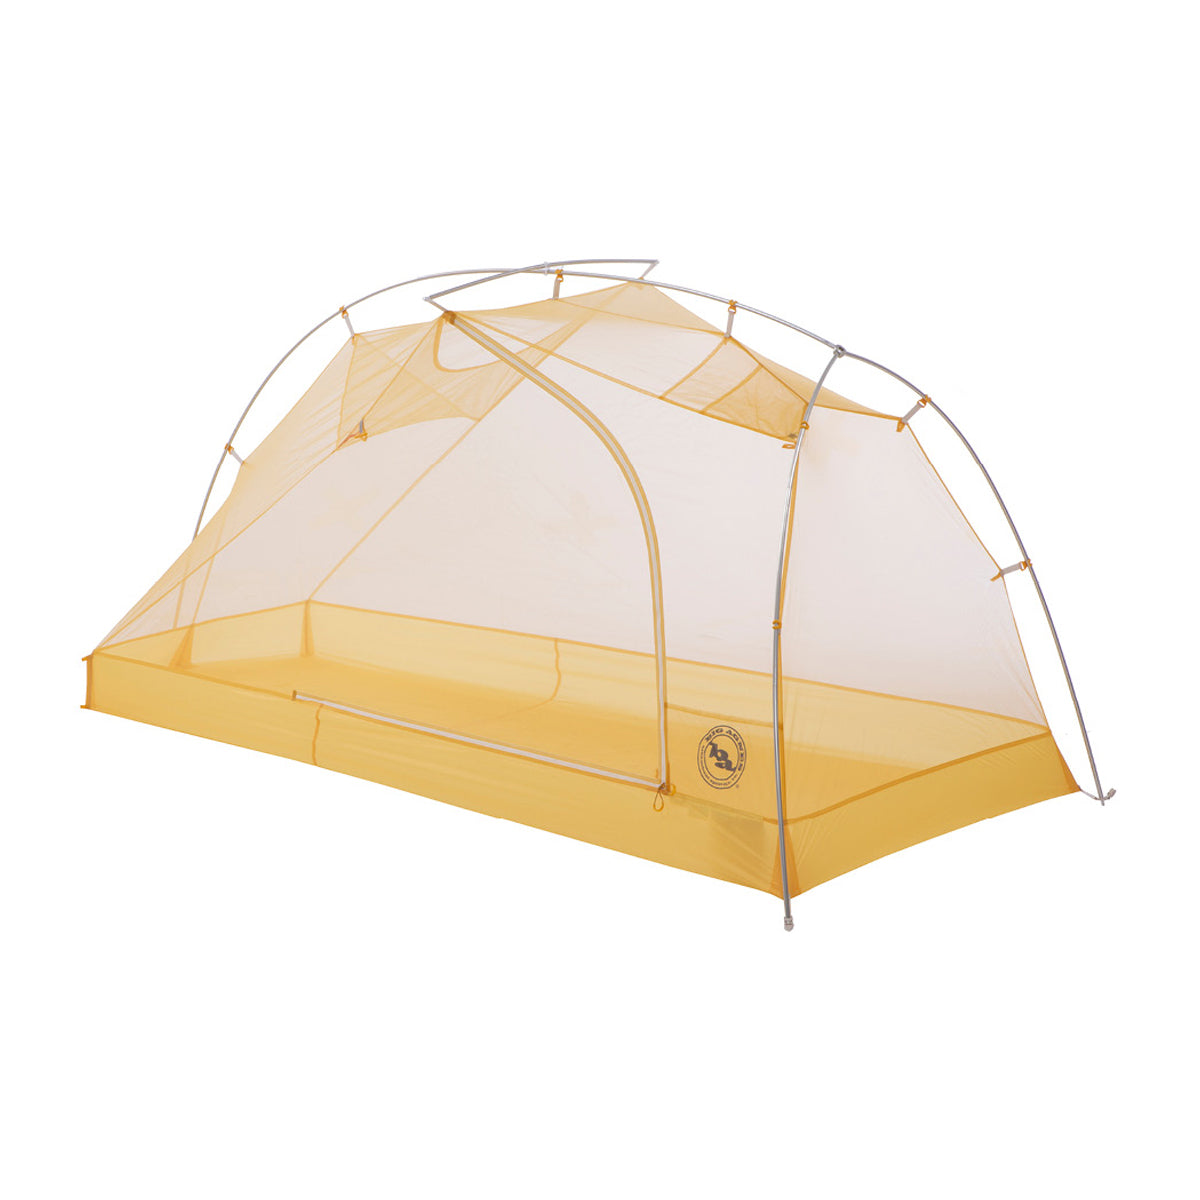 Big Agnes Tiger Wall UL 1 Person Solution Dye Tent